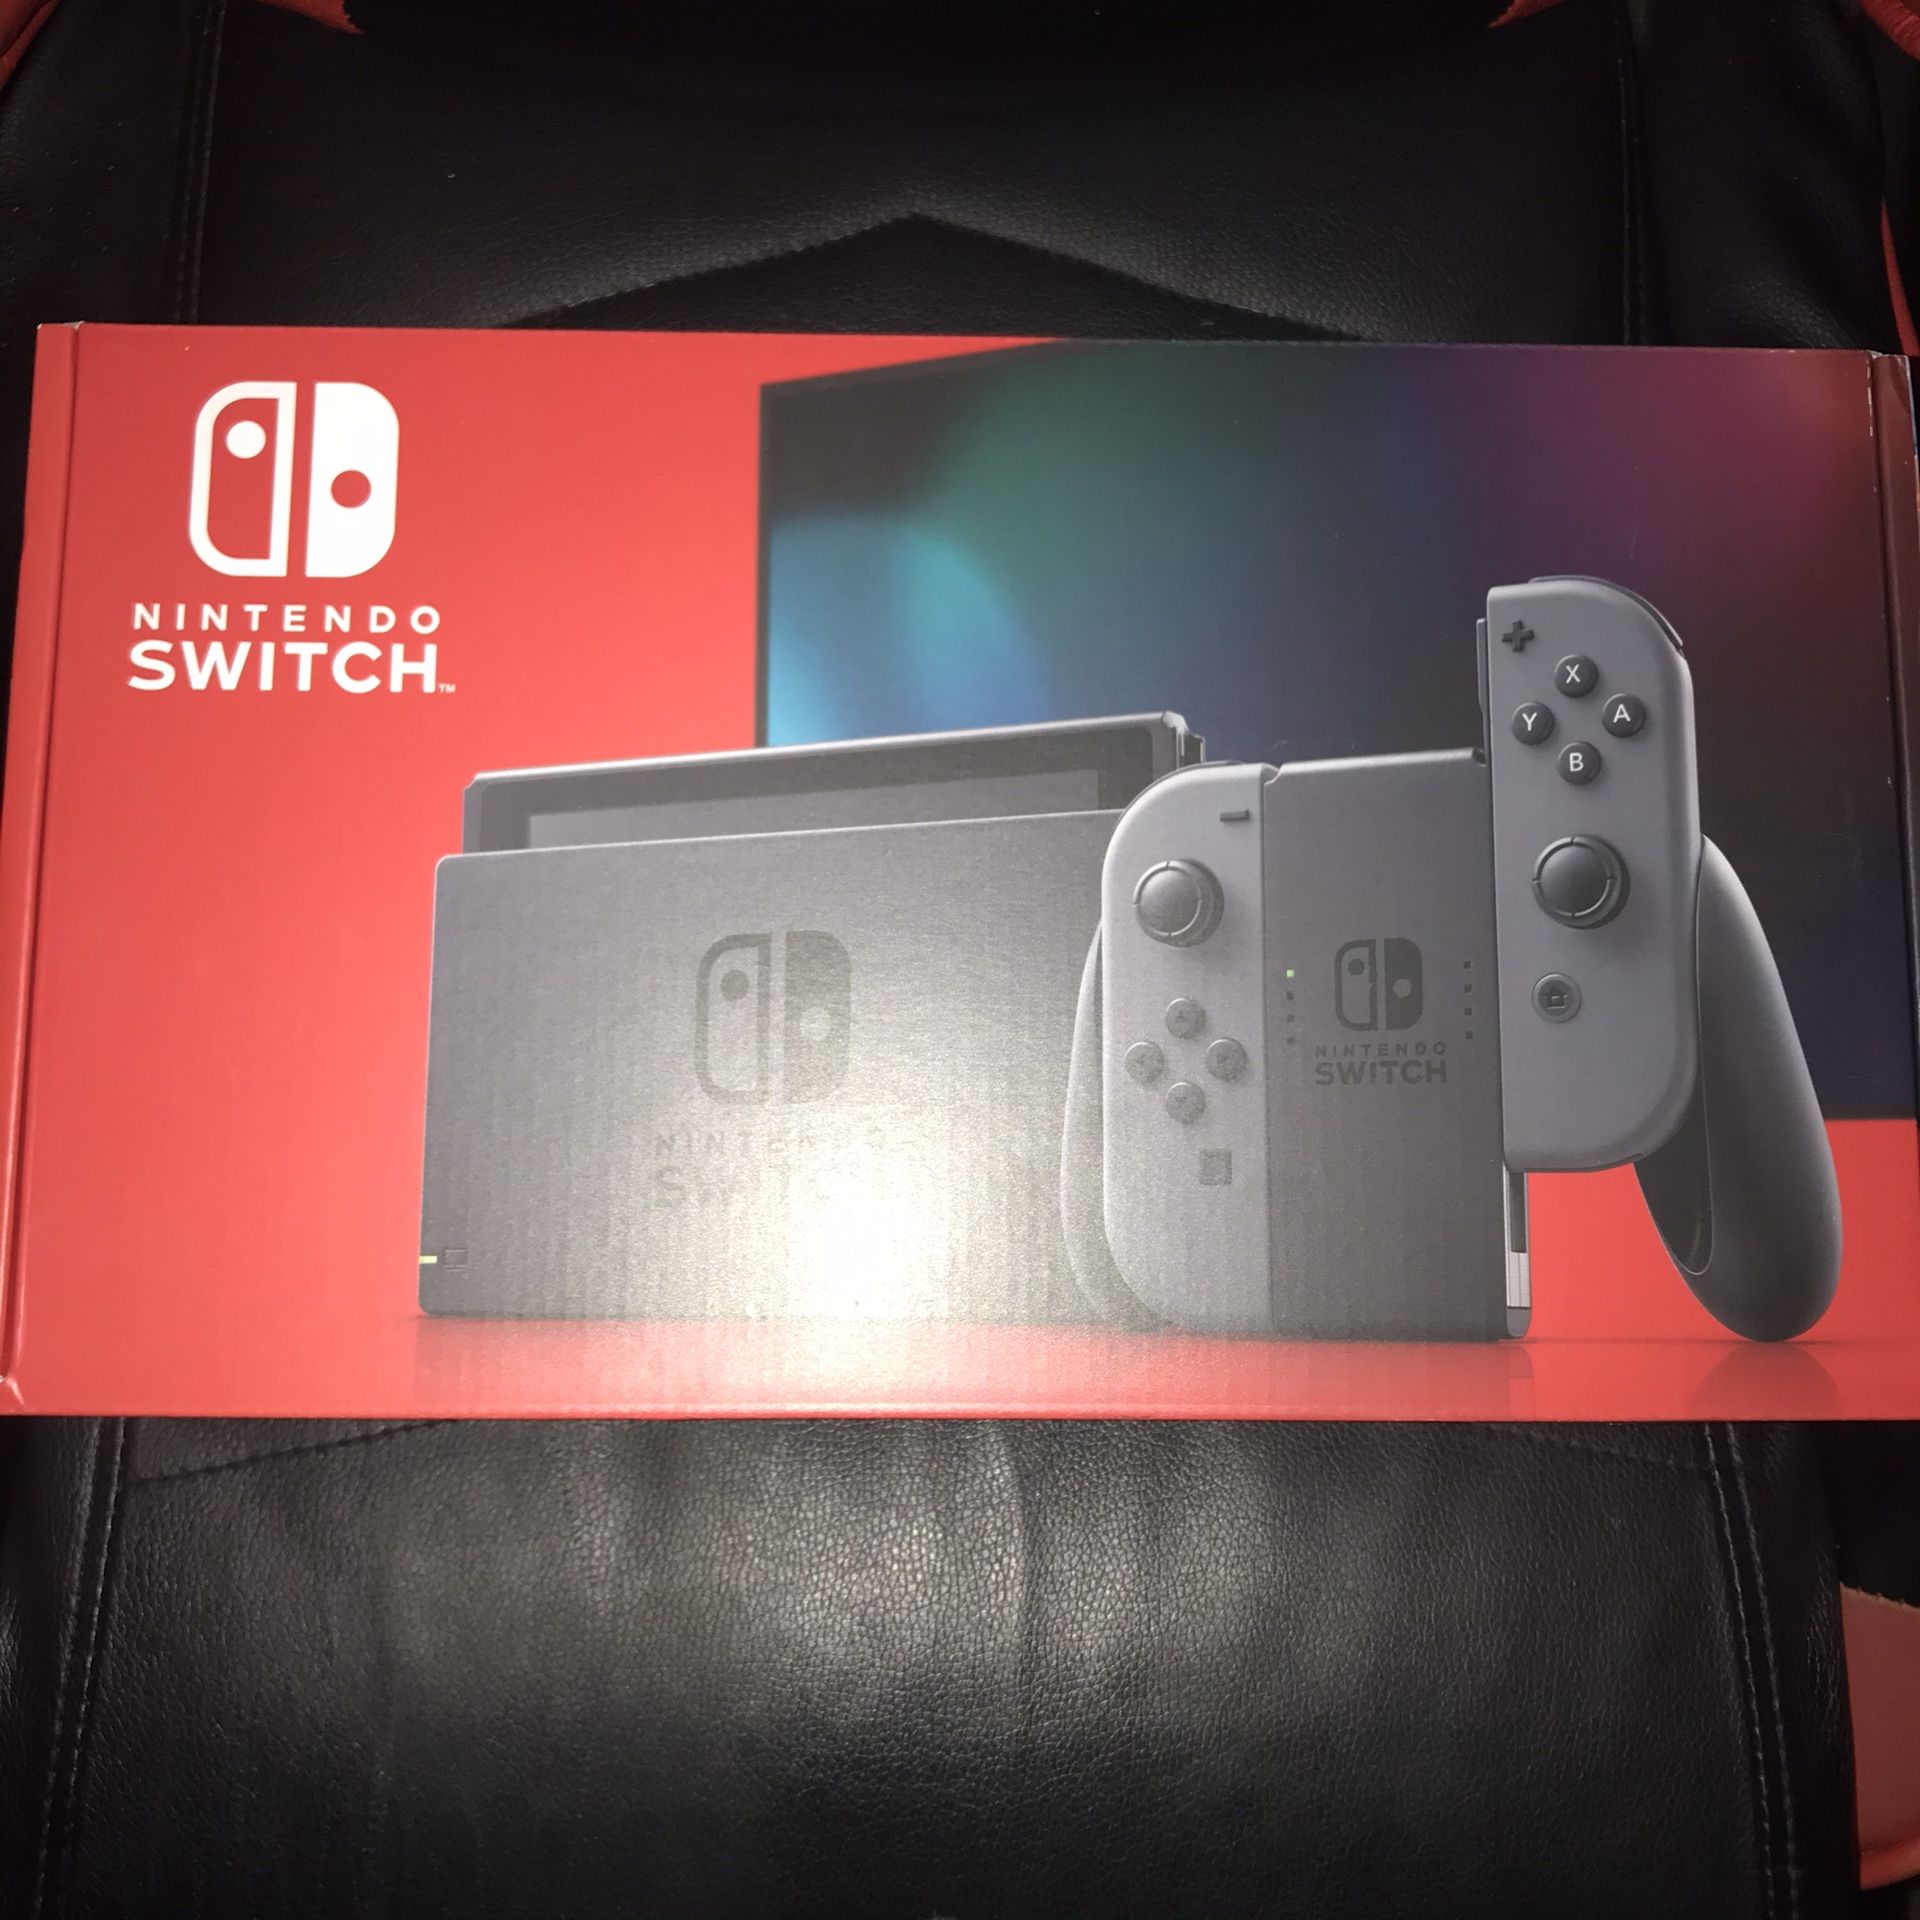 Brand New Nintendo Switch 32GB Console. Available in both colors